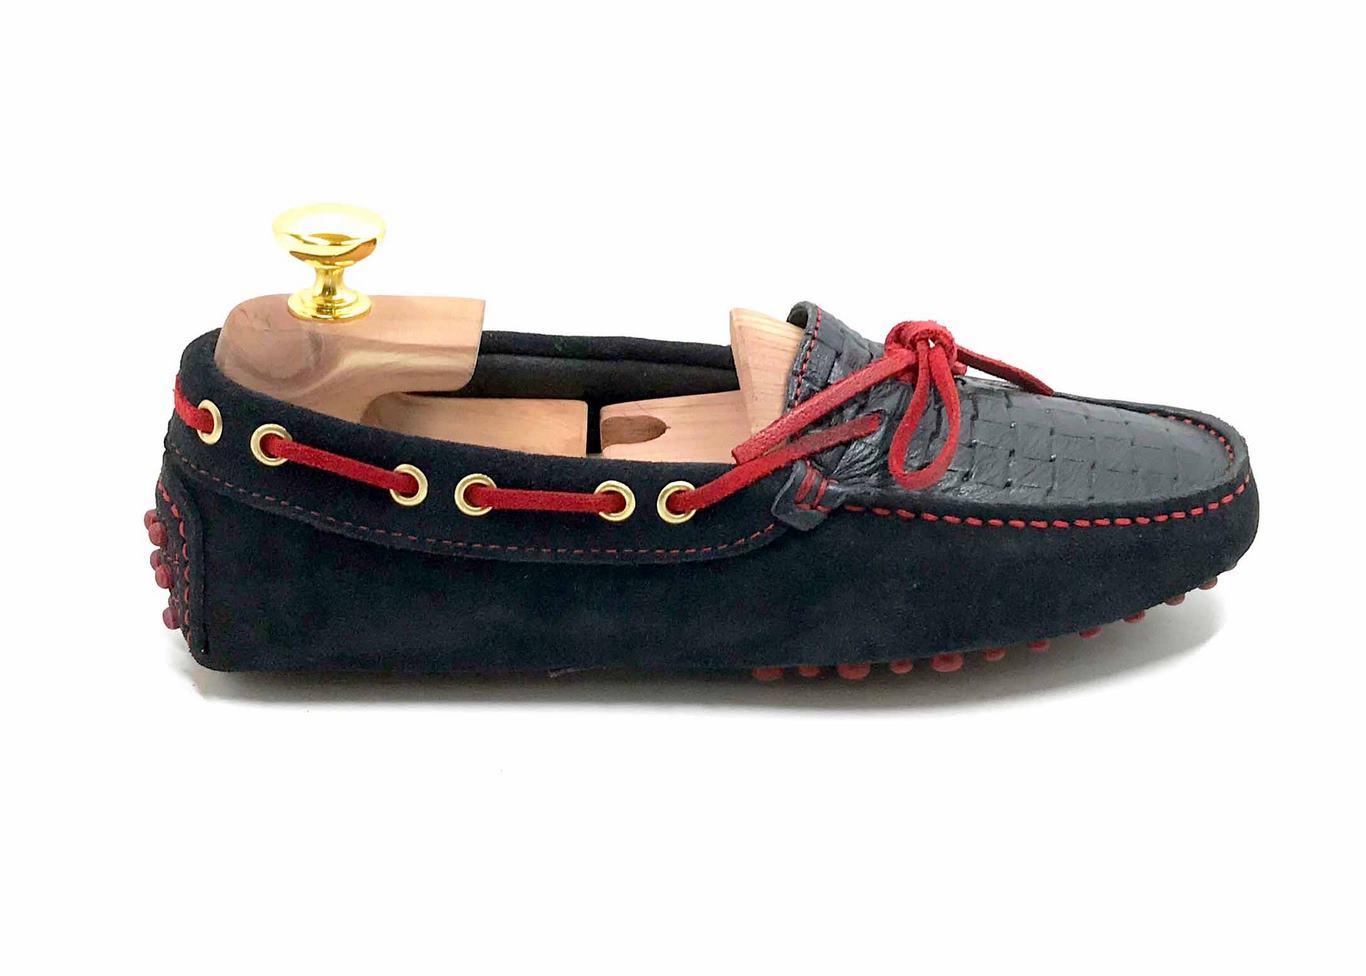 Loafers 'Drive' in Blue navy suede & woven calf, with laces and stitching in Red.